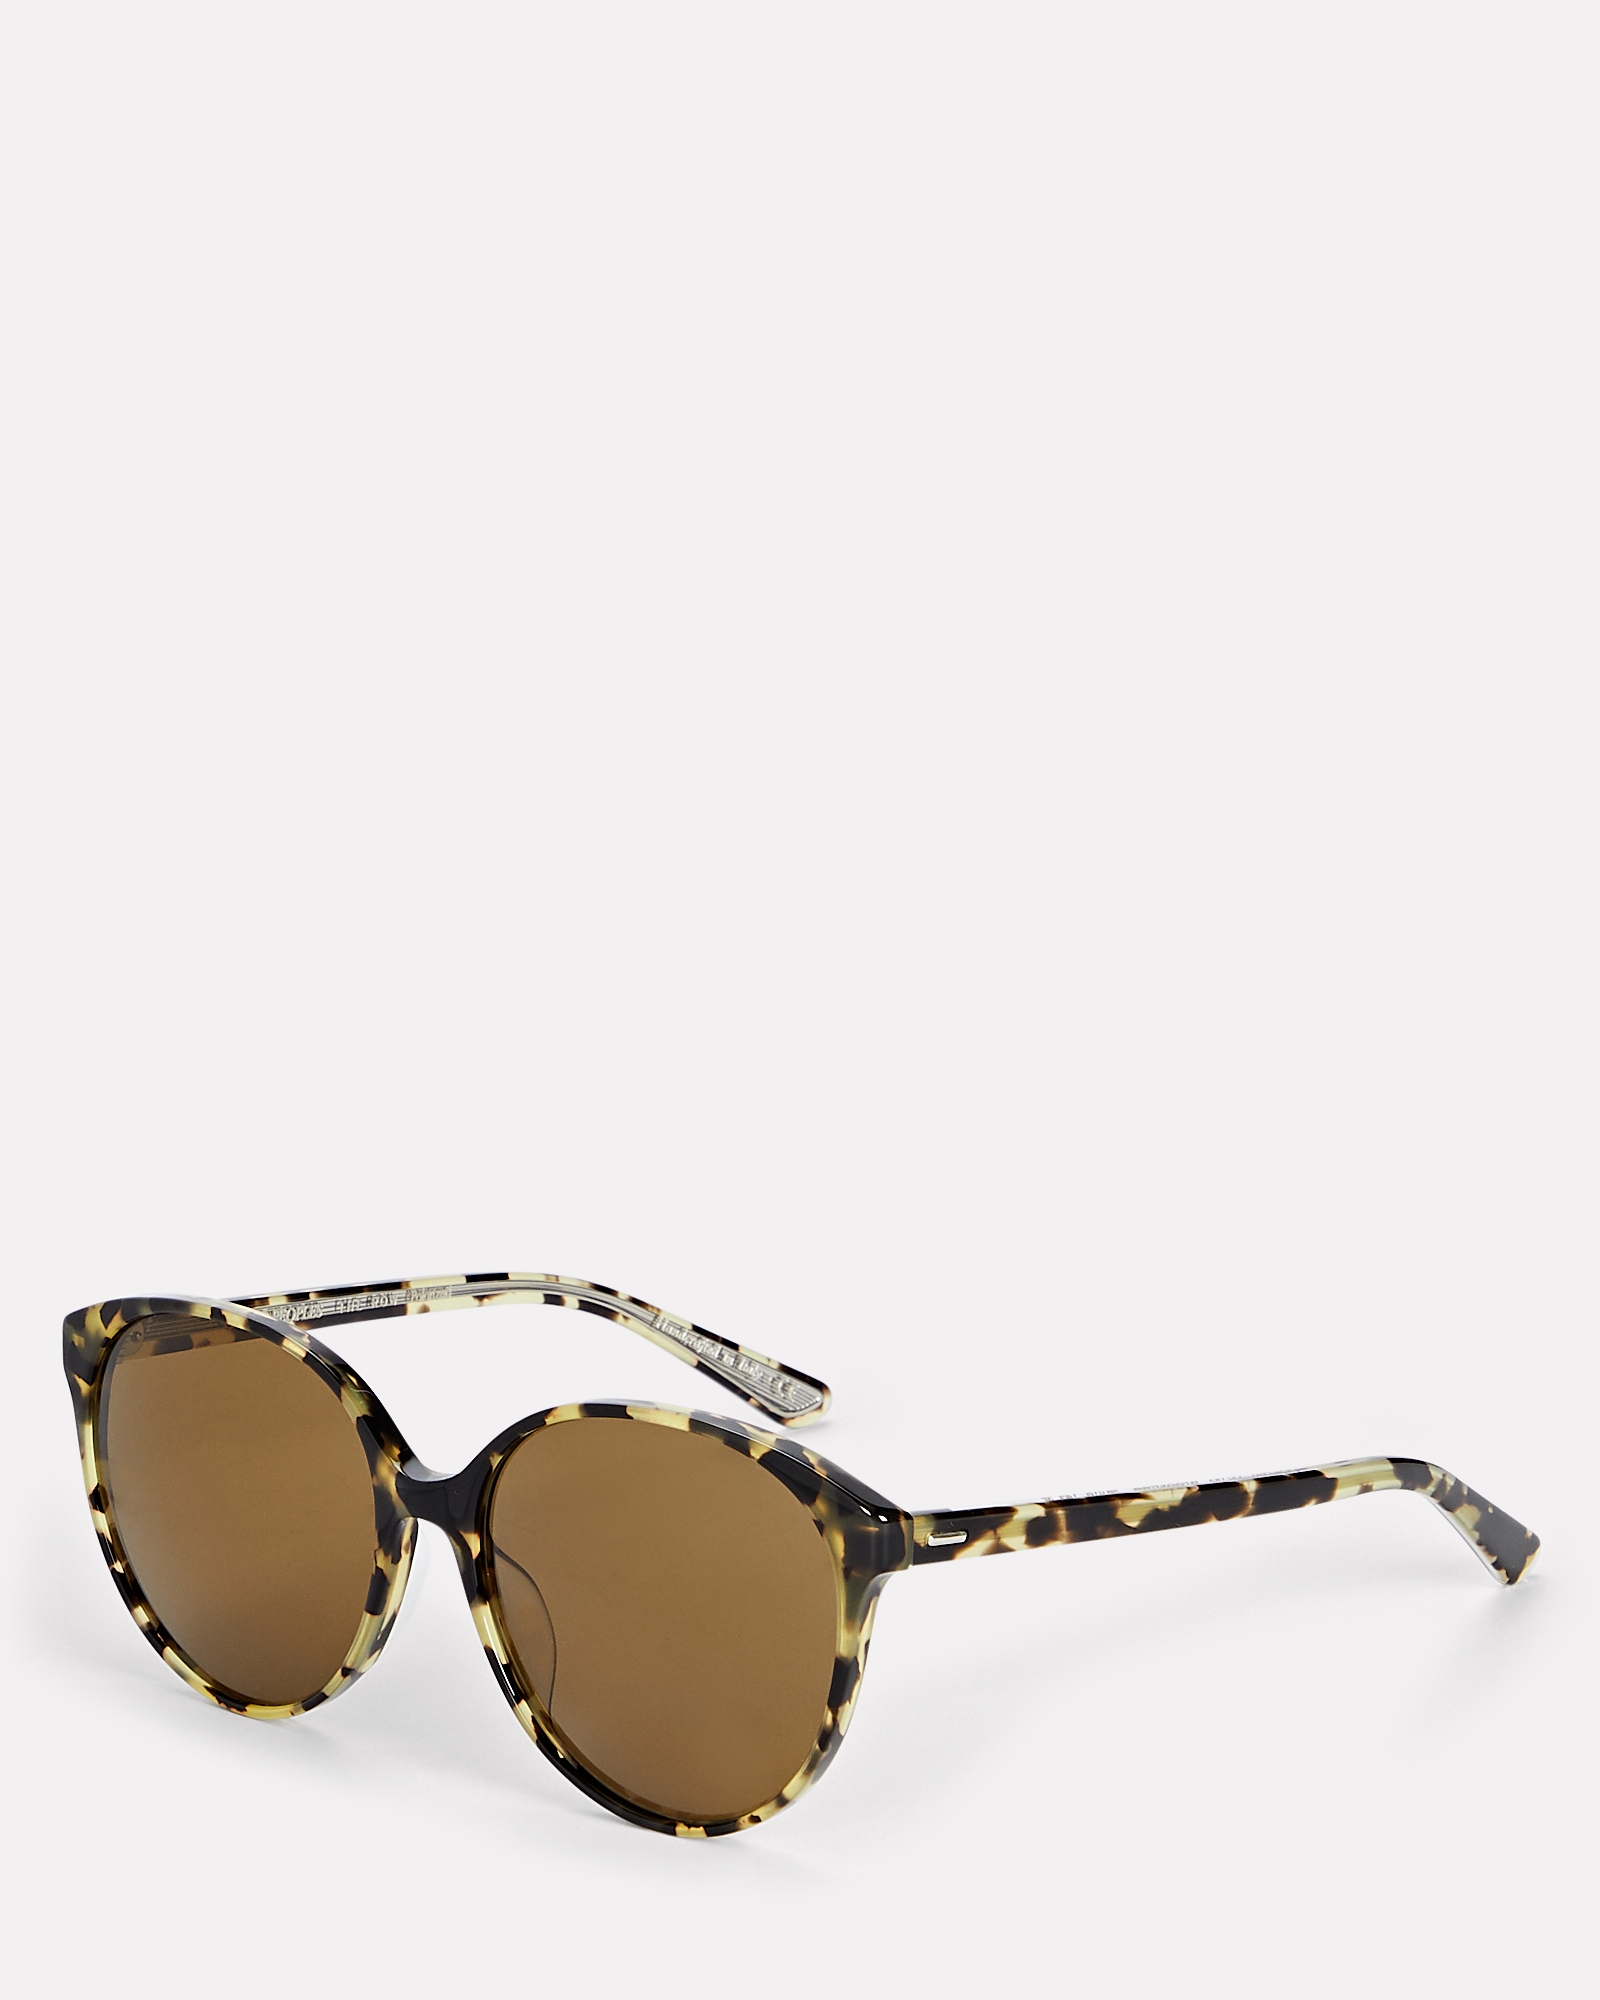 The Row x Oliver Peoples Brooktree Oversized Round Sunglasses | INTERMIX®